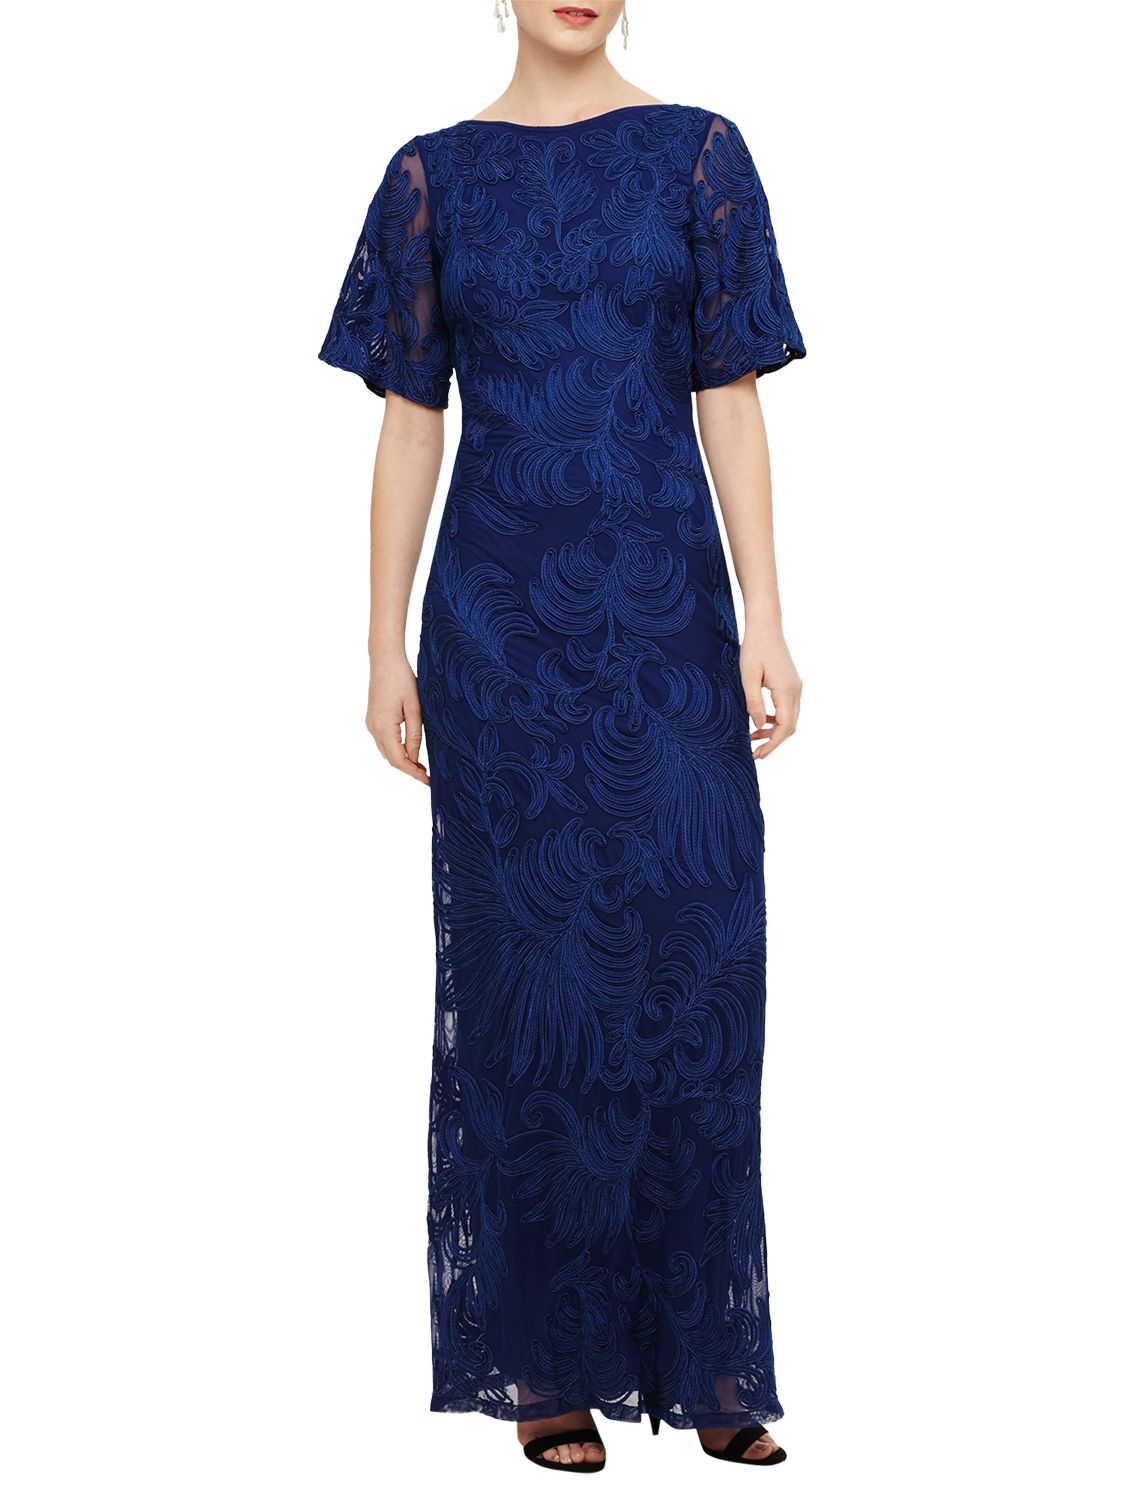 Phase Eight Cecily Tapework Dress, Cobalt Blue